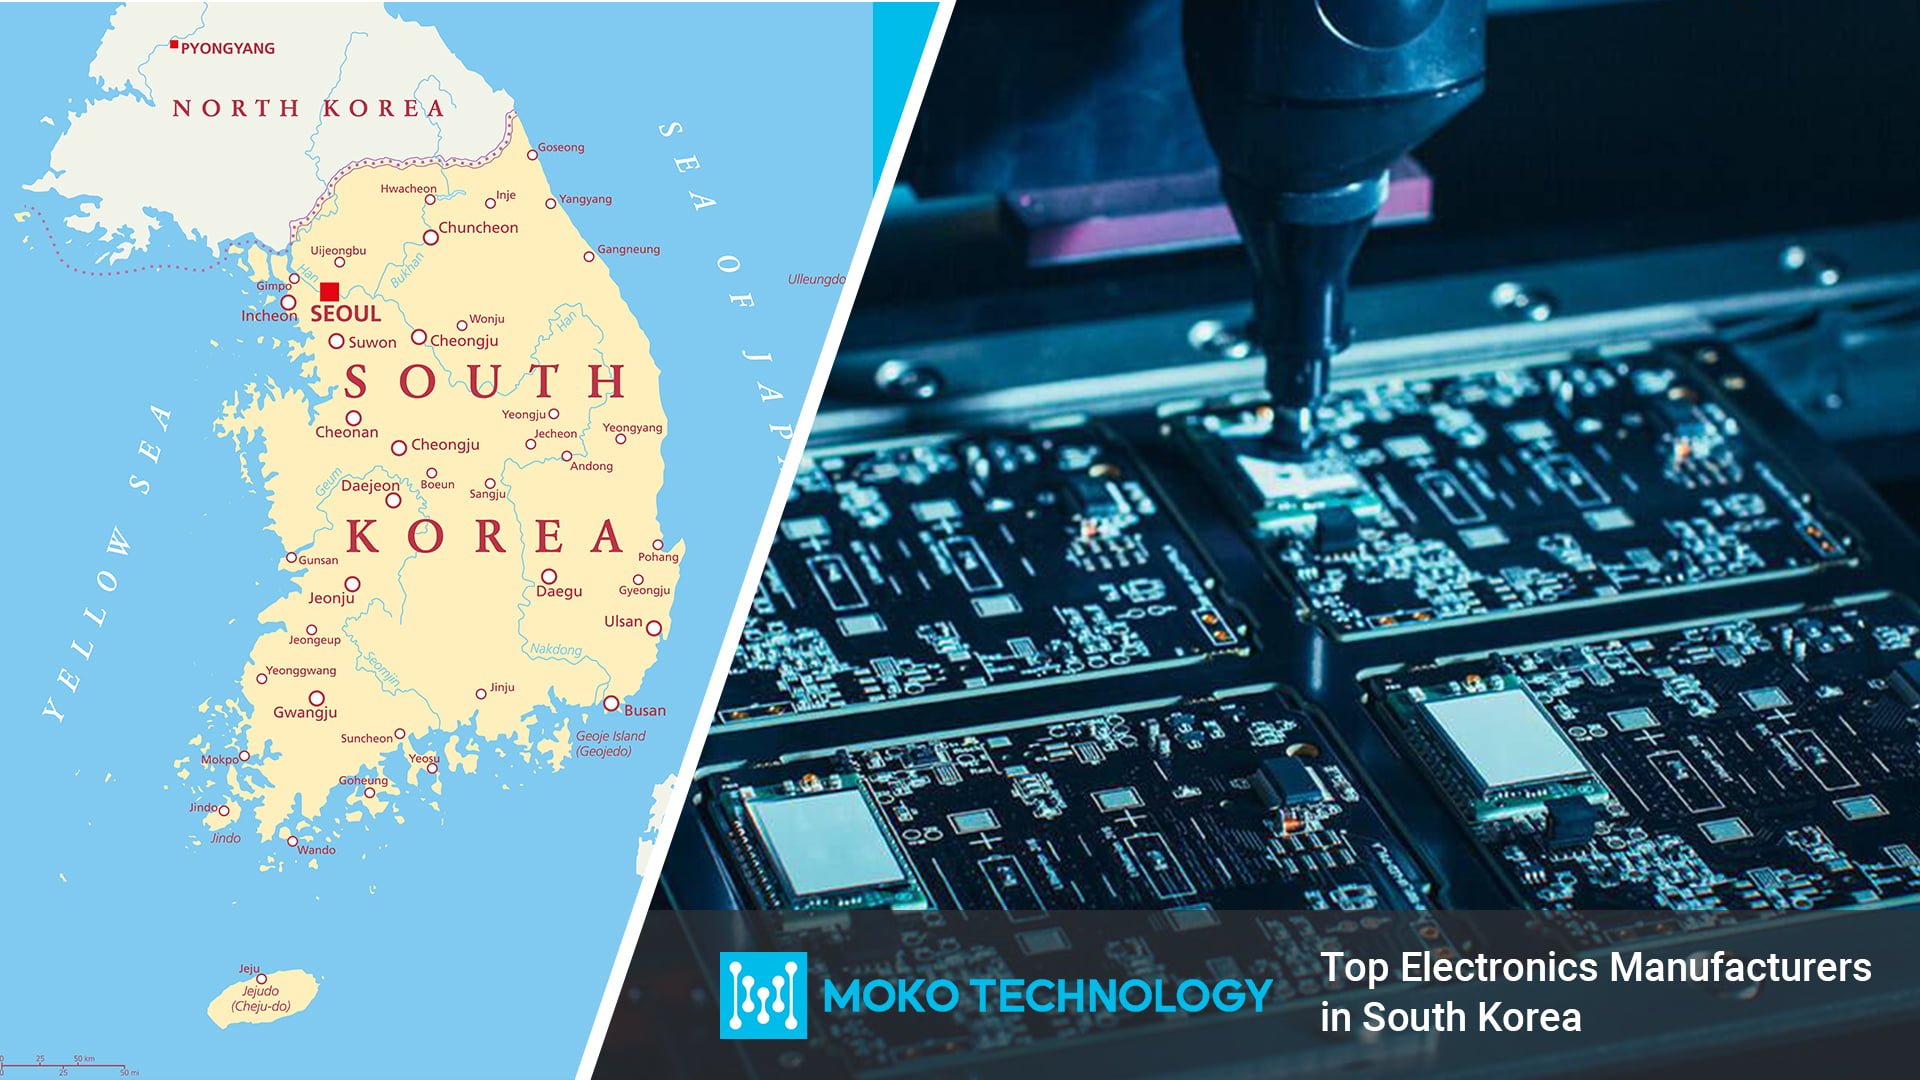 Electronics manufacturers in South Korea